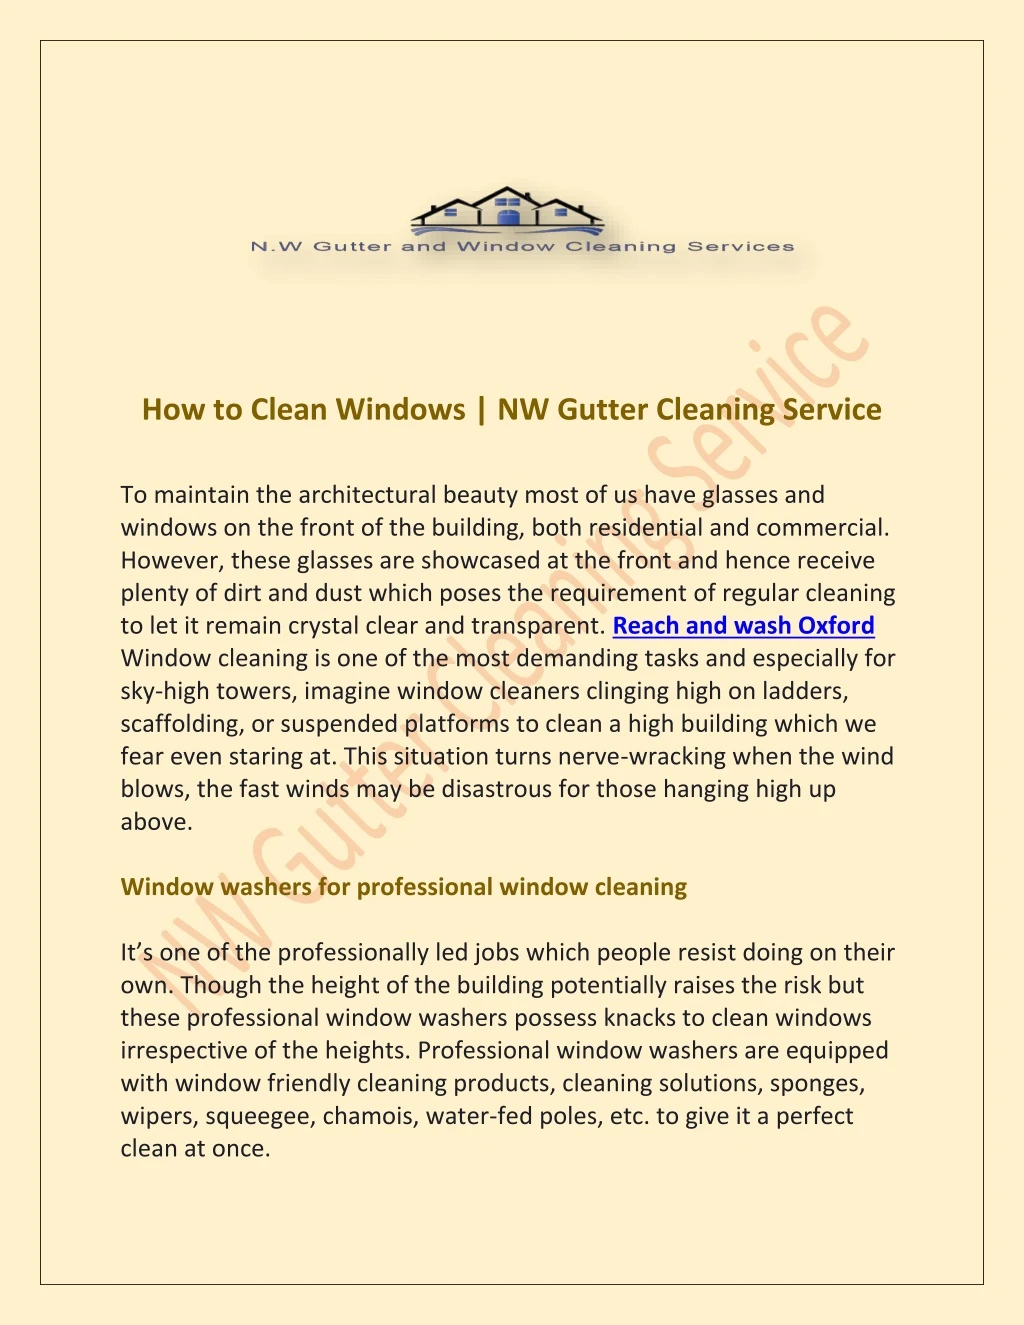 how to clean windows nw gutter cleaning service